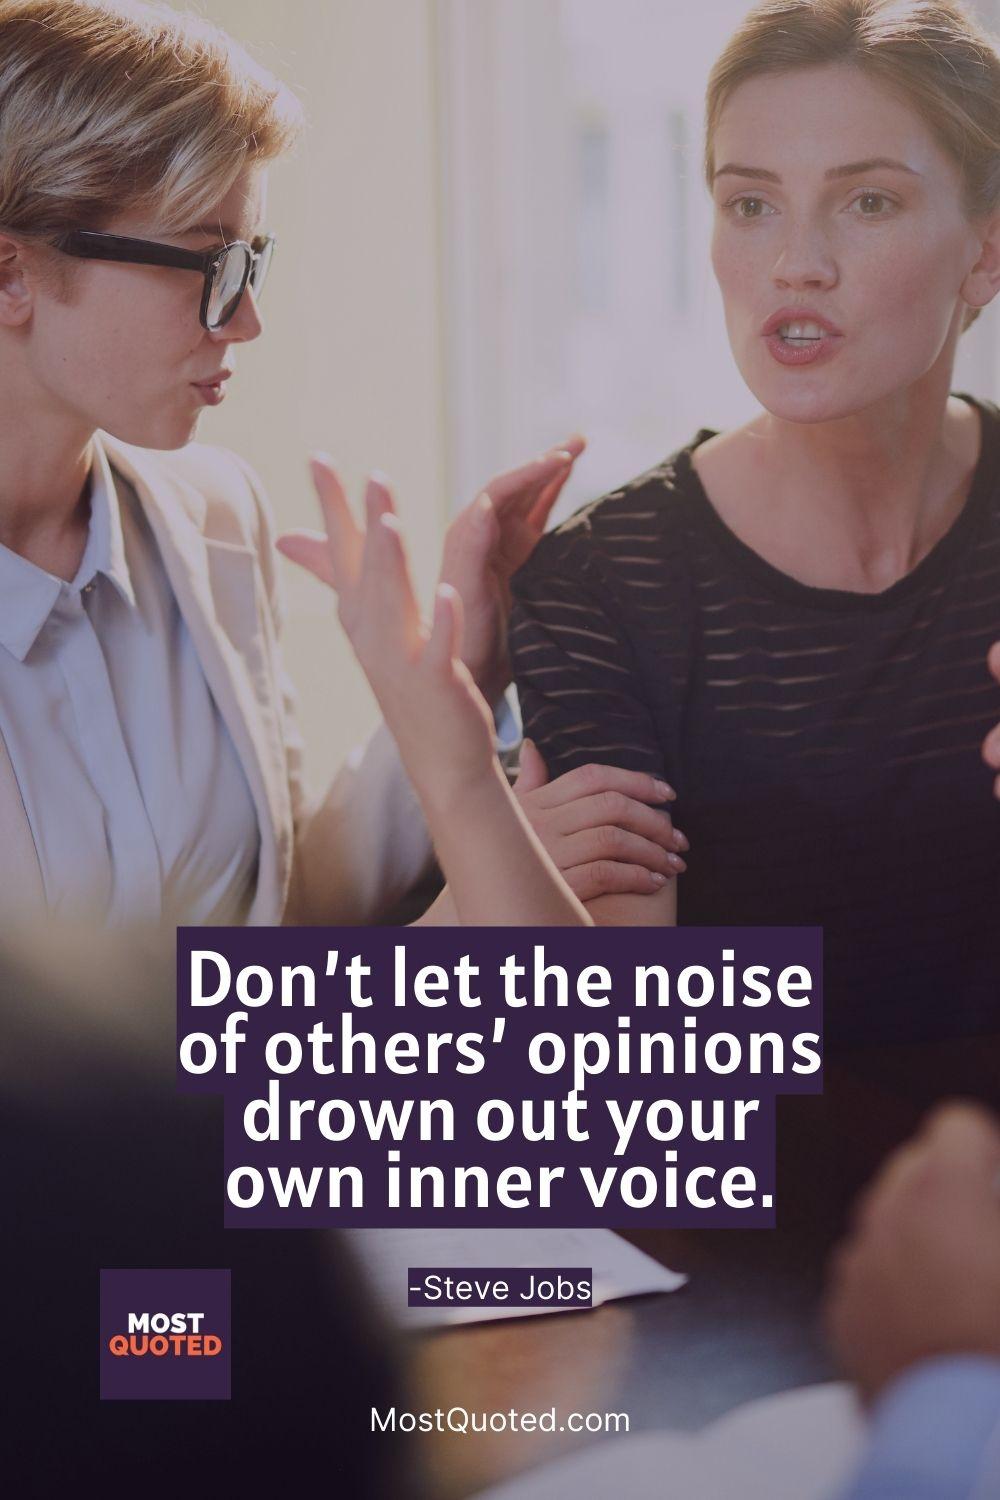 Don’t let the noise of others’ opinions drown out your own inner voice. - Steve Jobs